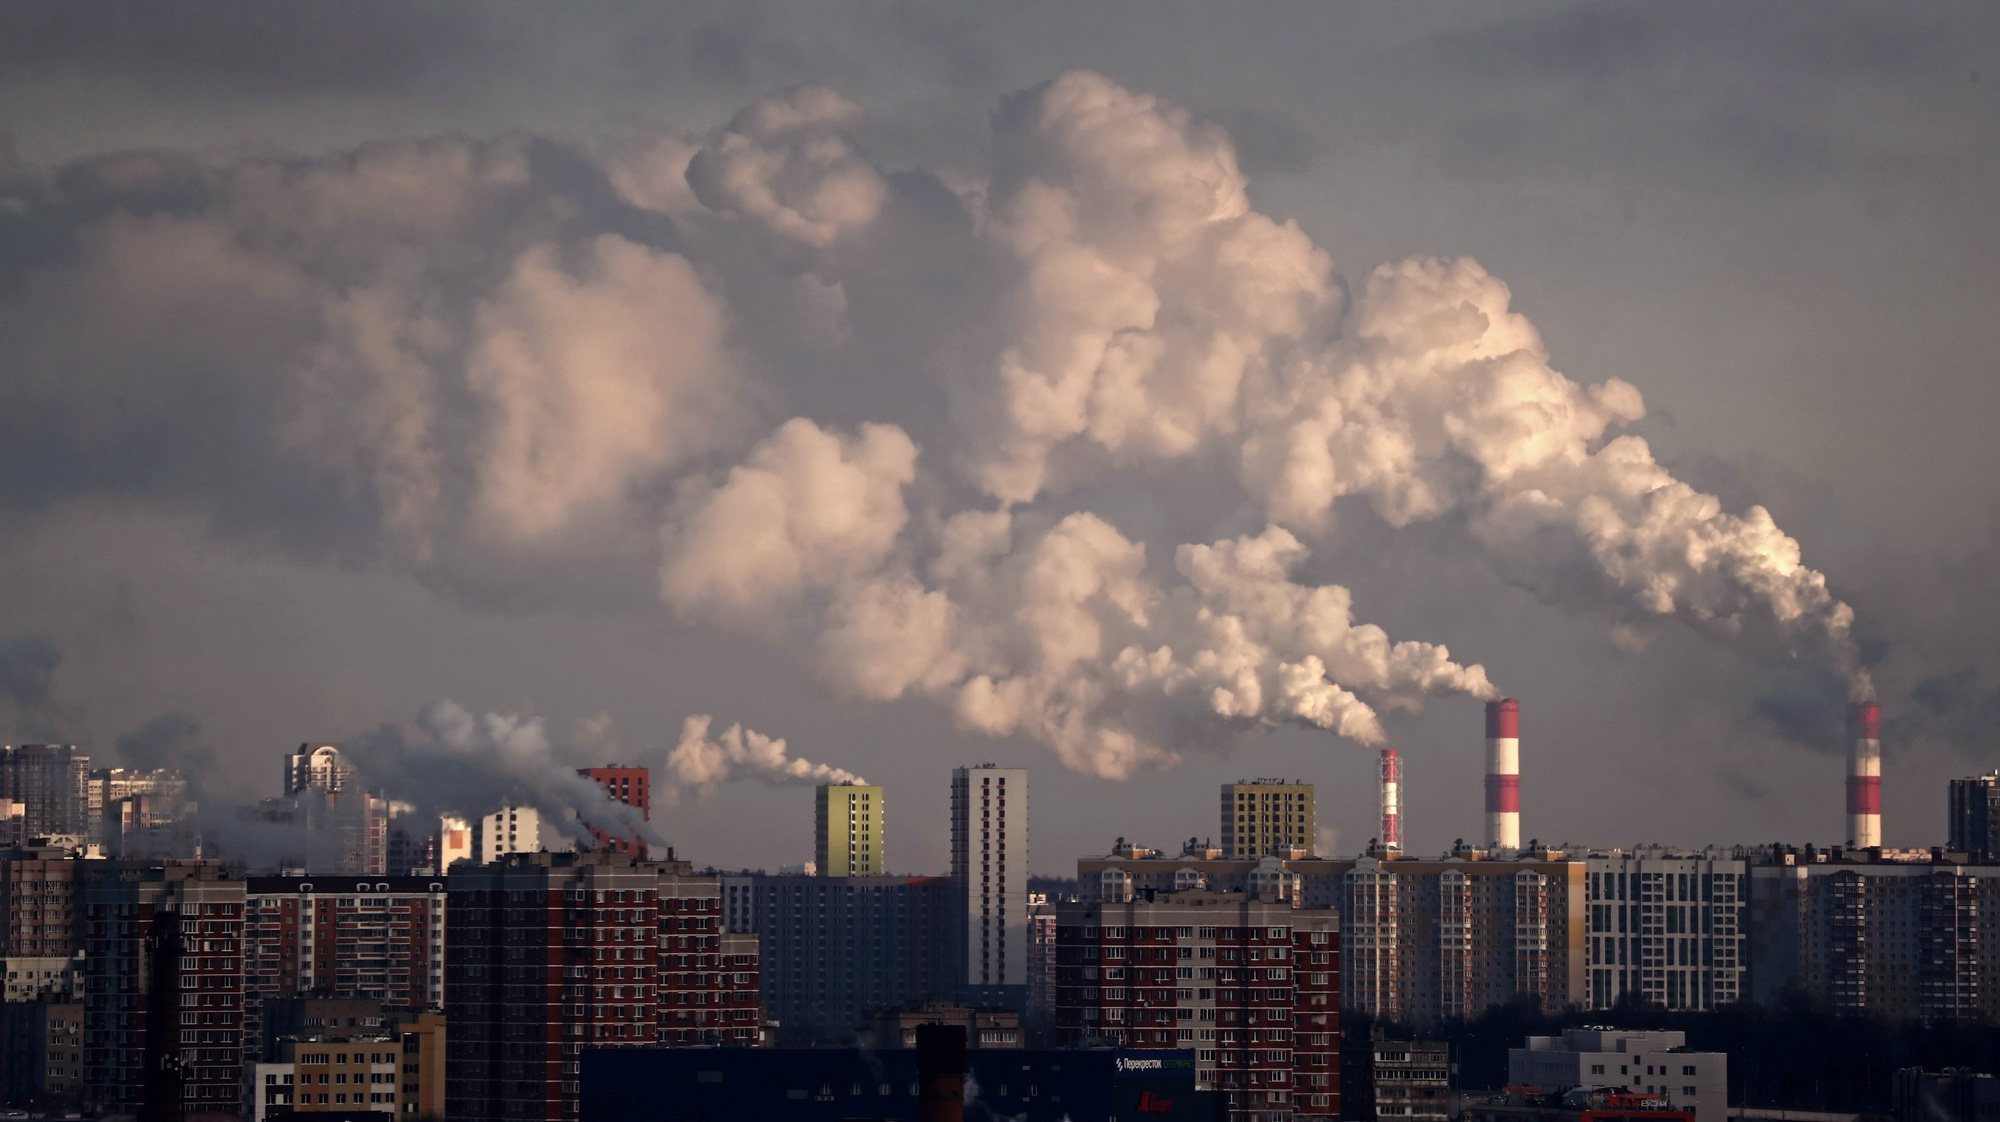 epa08013495 Smoke rises from chimneys of the gas boiler houses as the temperature dropped to minus 7 degrees Celsius in Moscow, Russia, 21 November 2019. Spanish Madrid will host the COP25 World Climate Change Conference from 02 to 13 December replacing Chile.  EPA/MAXIM SHIPENKOV